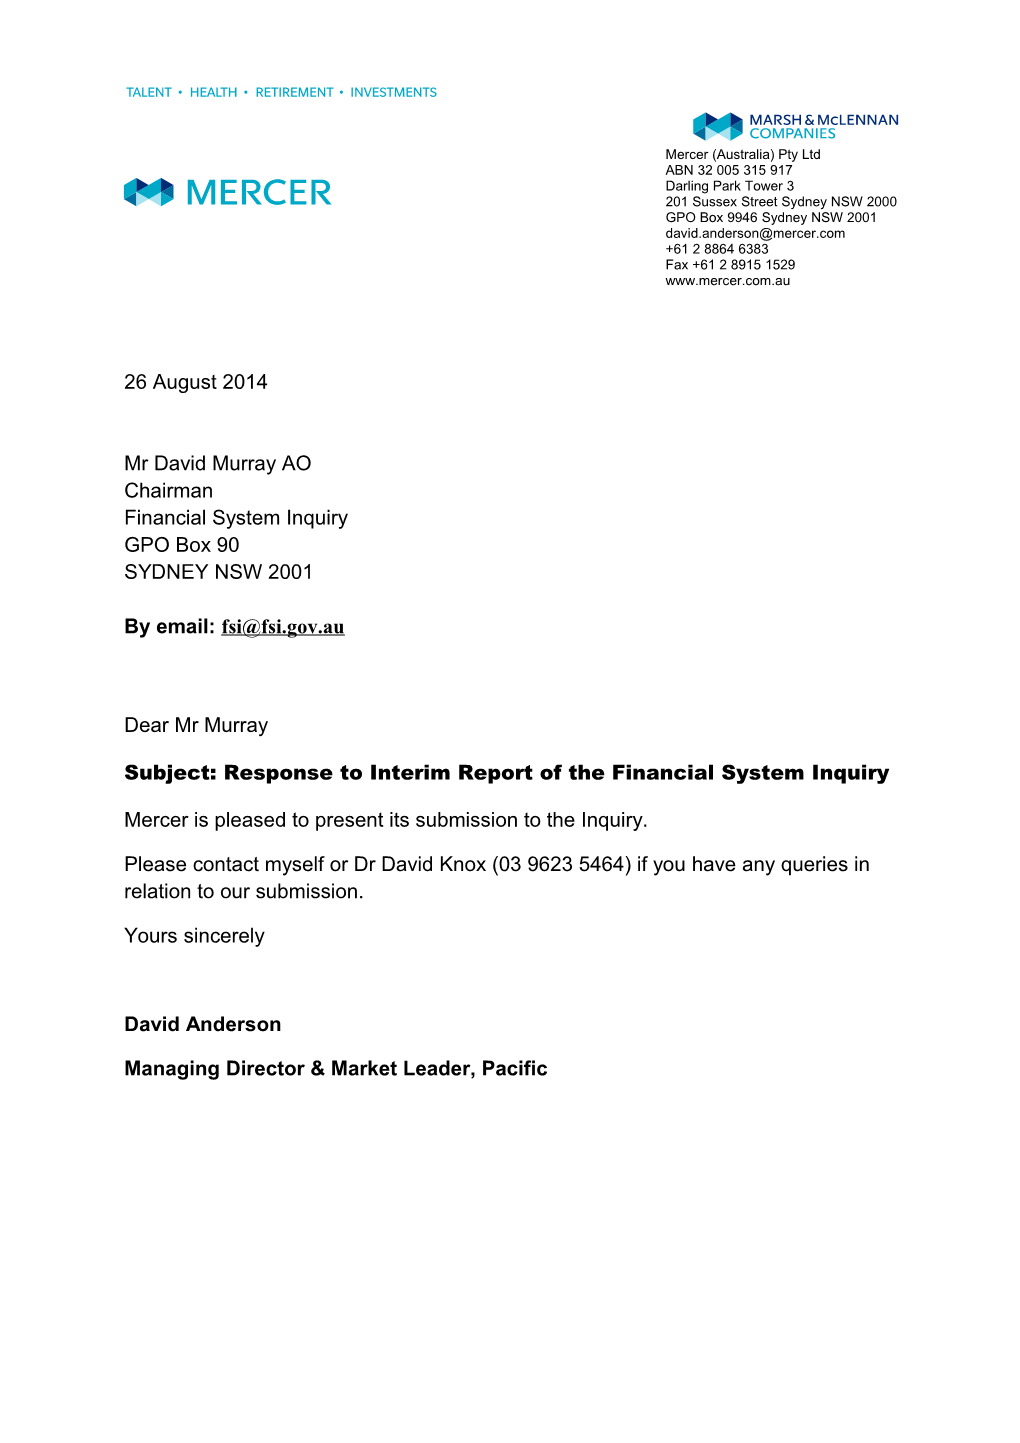 Mercer - Submission to the Financial System Inquiry. Issues Set out in the Inquiry's Interim